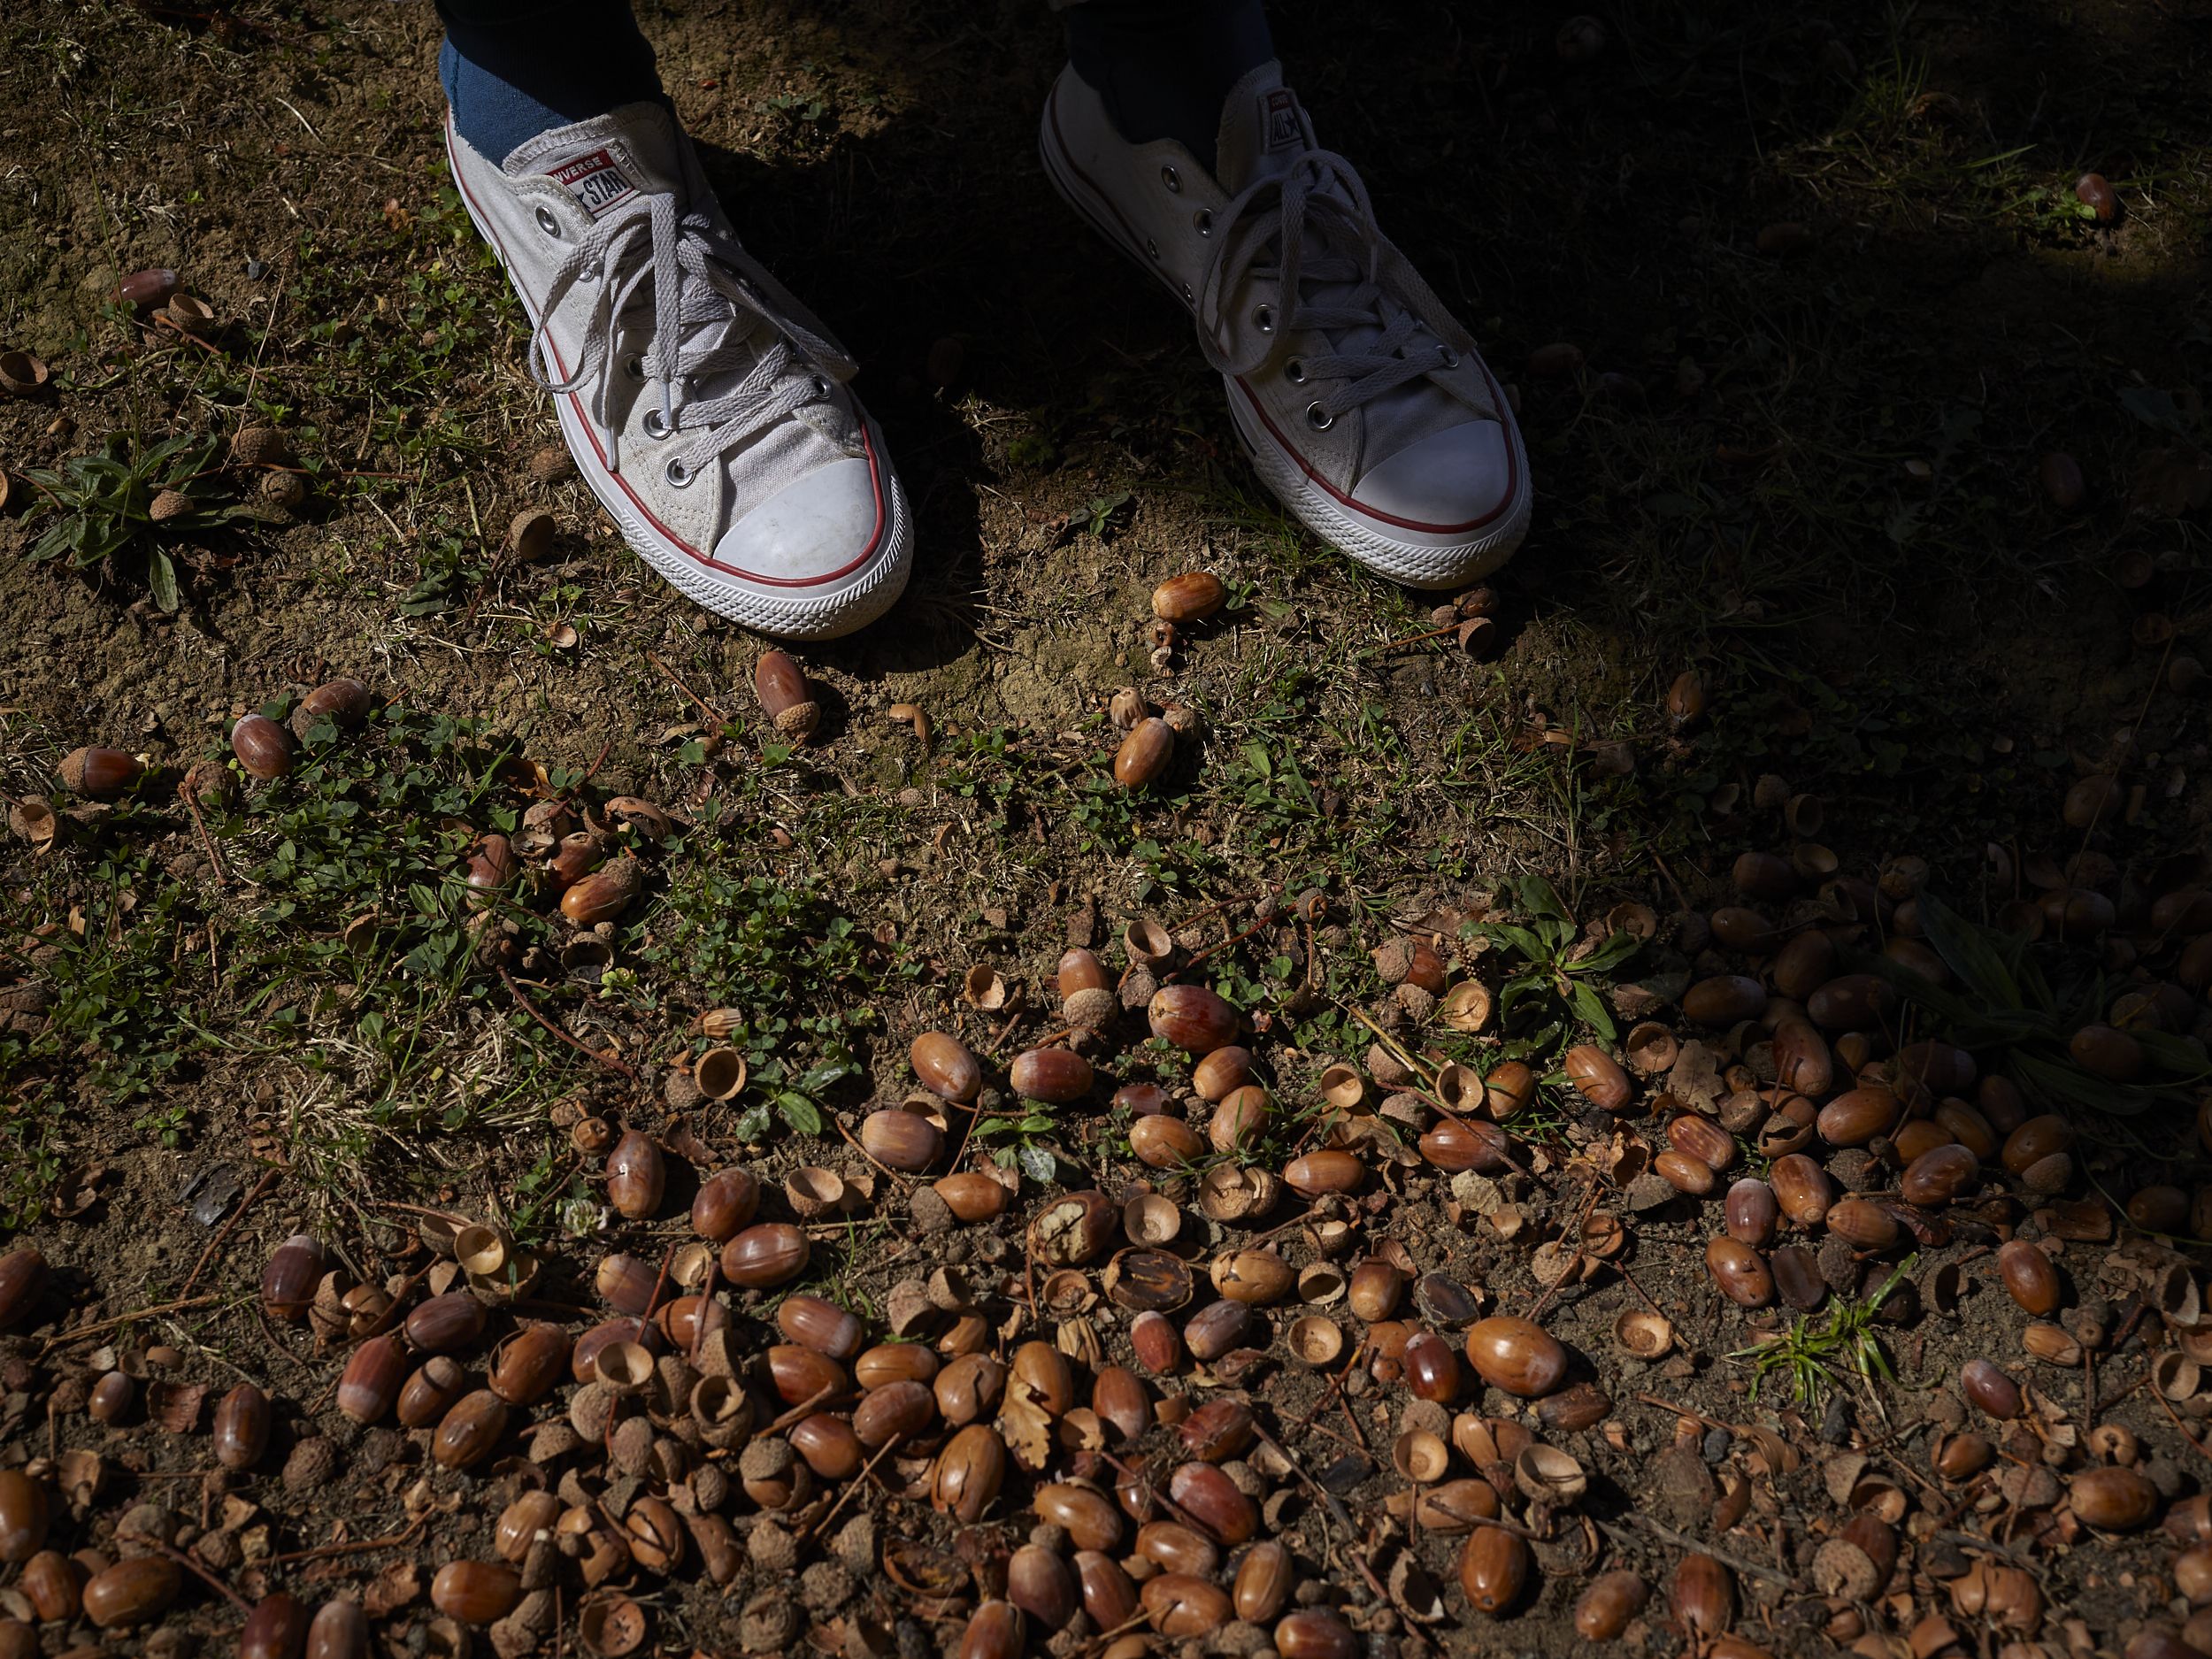 A pair of white sneakers stand next to a patch of fallen acorns.